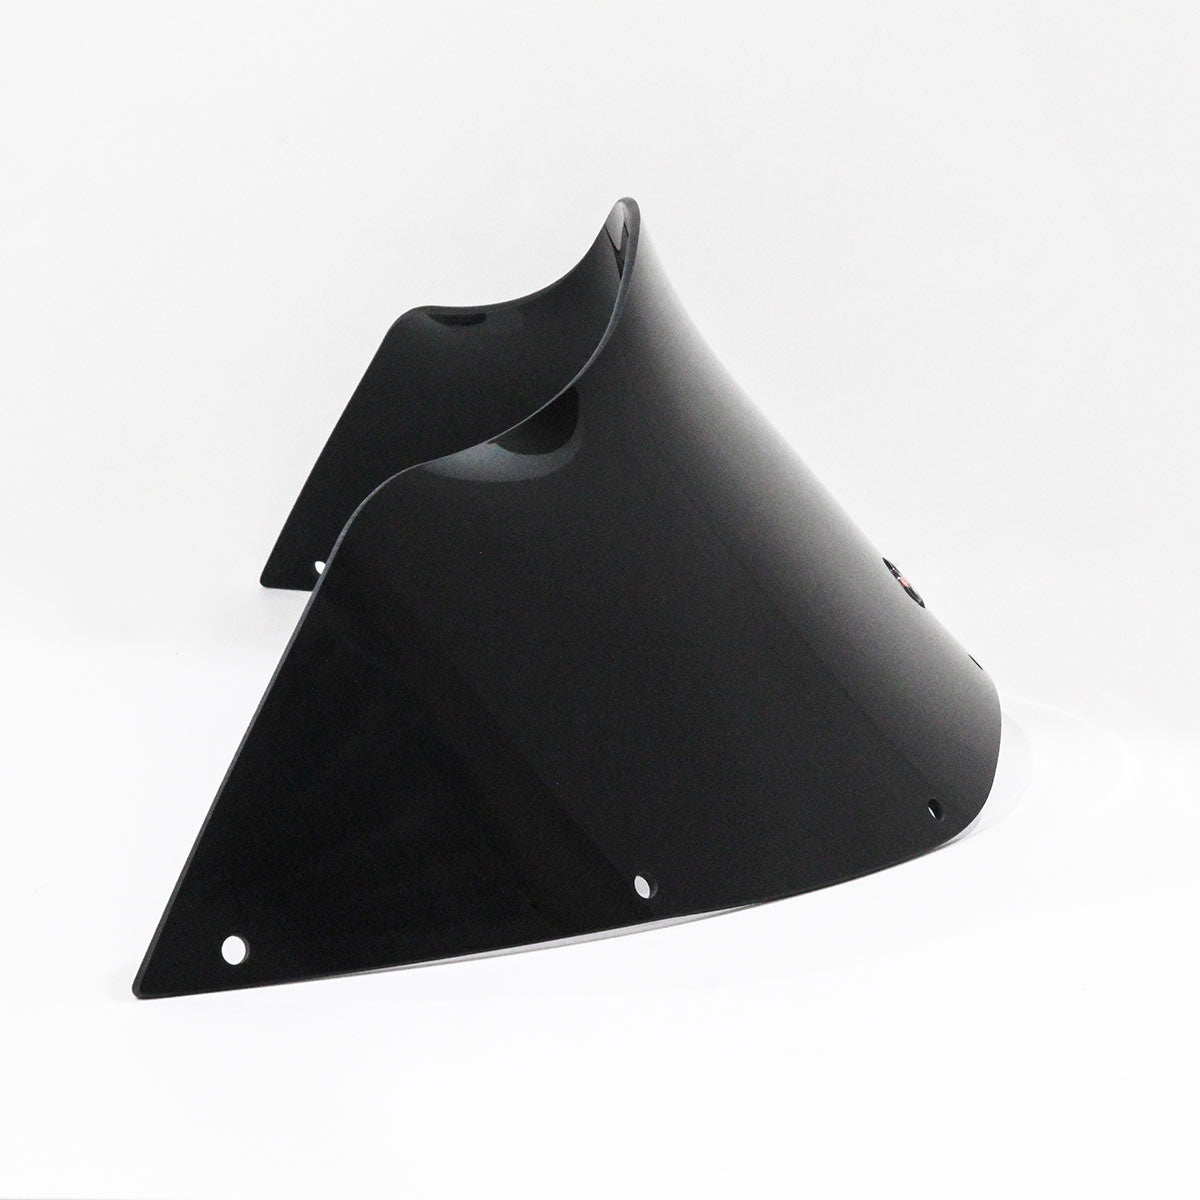 8" Solid Black Flare™ Windshield for Harley-Davidson motorcycles models with FXRP, FXRT, FXRD Style Fairings